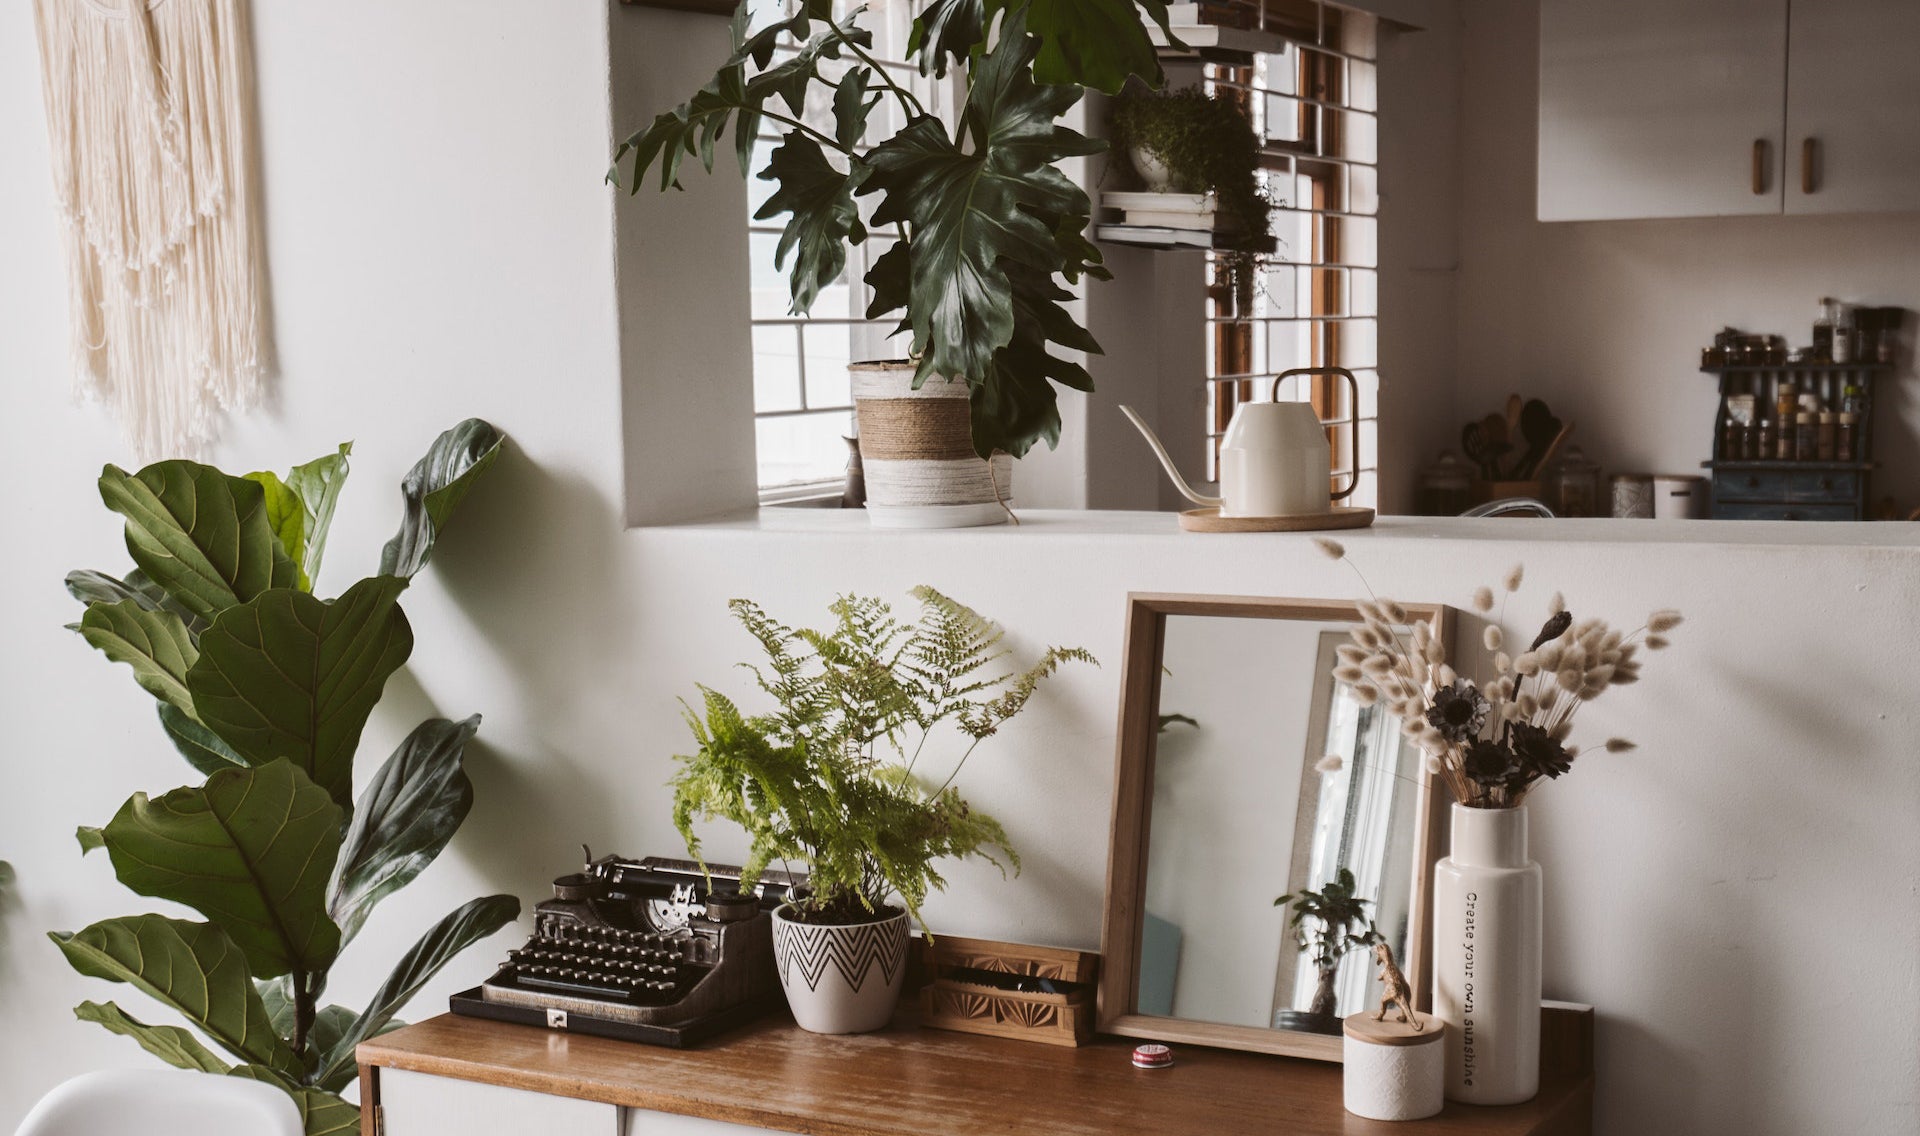 Photo of decor in living room. Plants, vase, typewriter sitting on wood table.